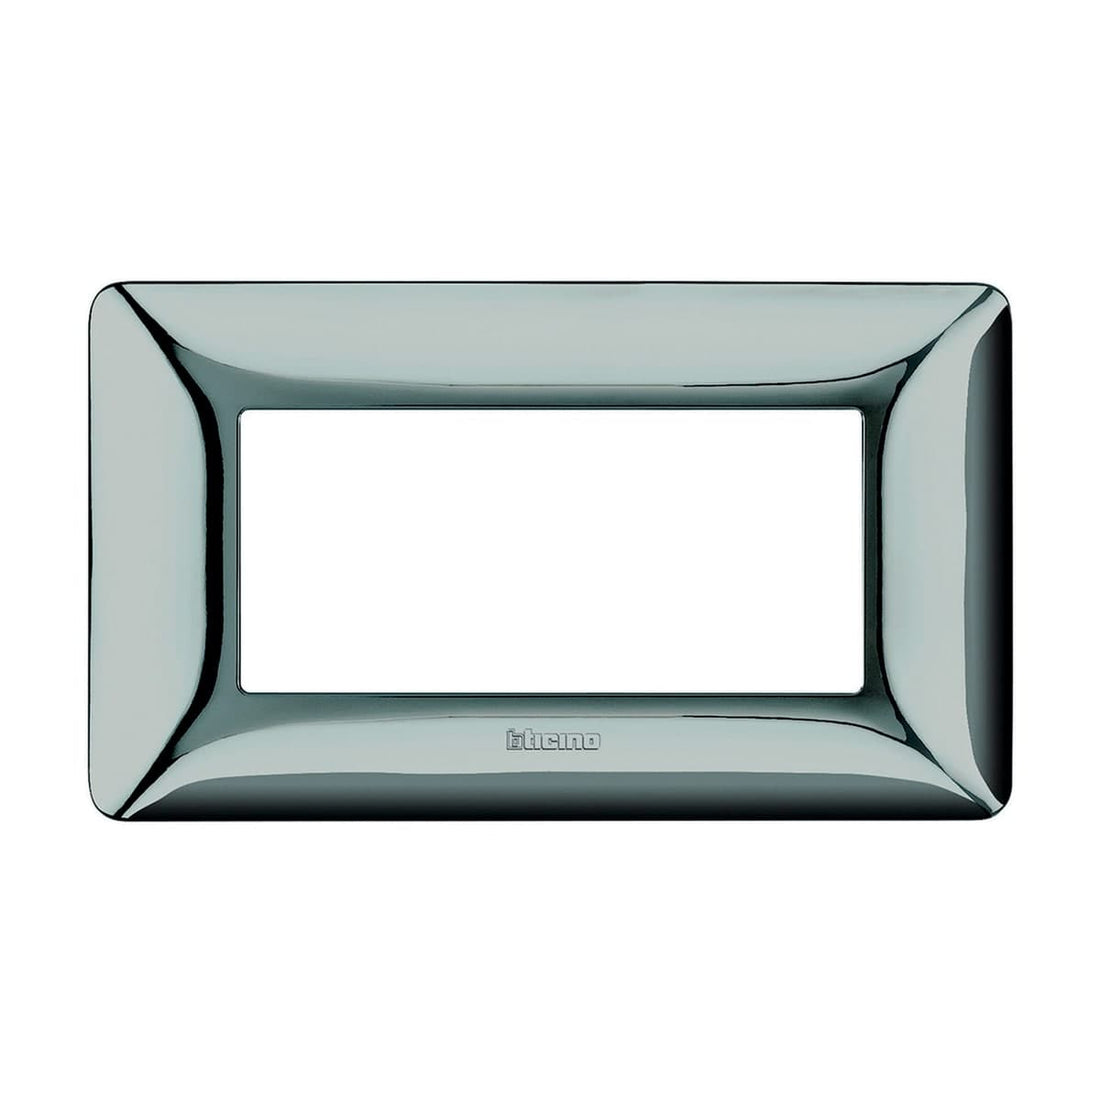 MATIX PLATE 4 PLACES POLISHED CHROME - best price from Maltashopper.com BR420100826